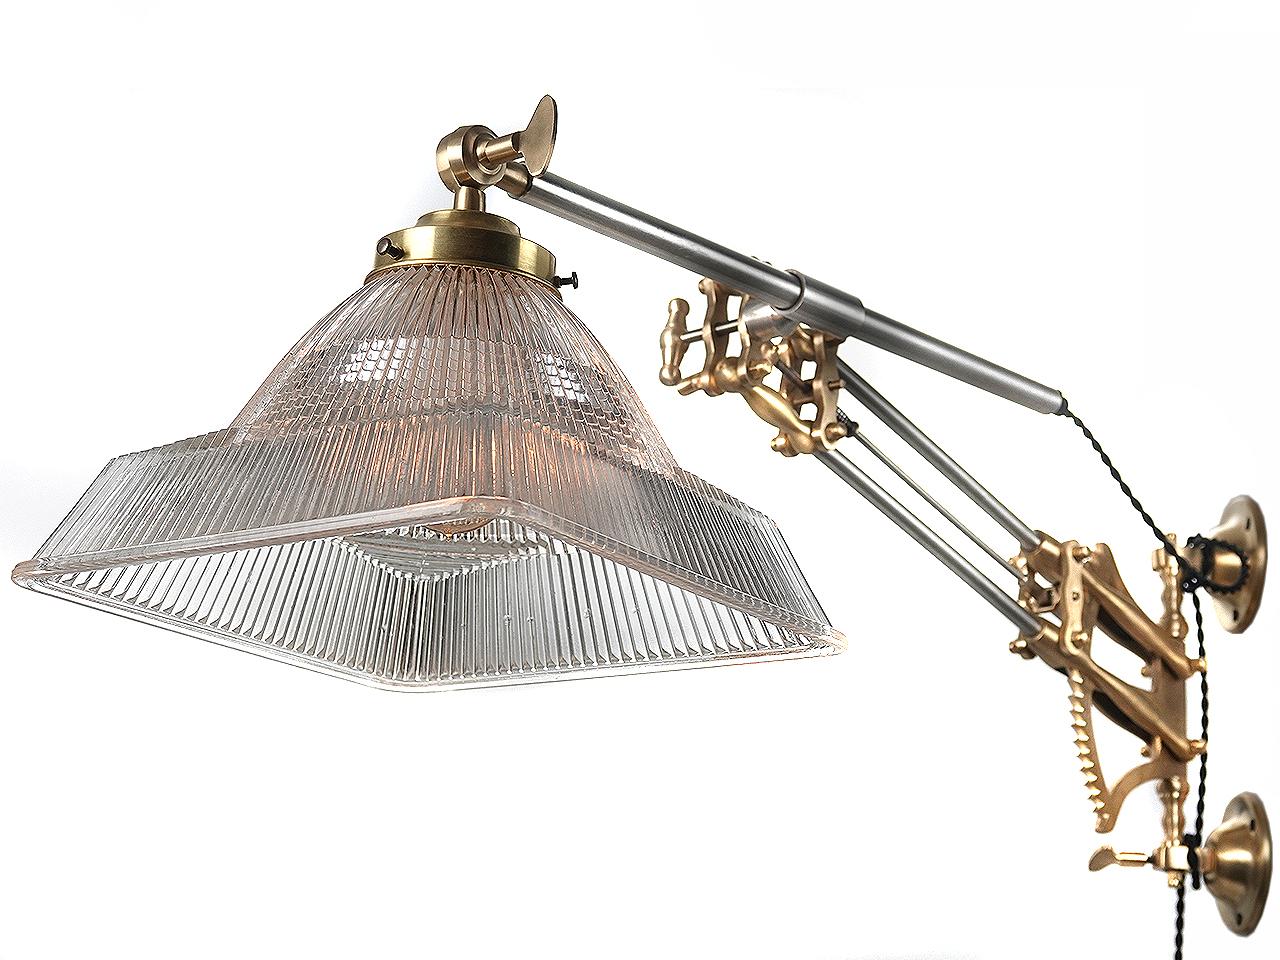 20th Century Elaborate Articulated and Ratcheted Wall Bracket Lamp For Sale